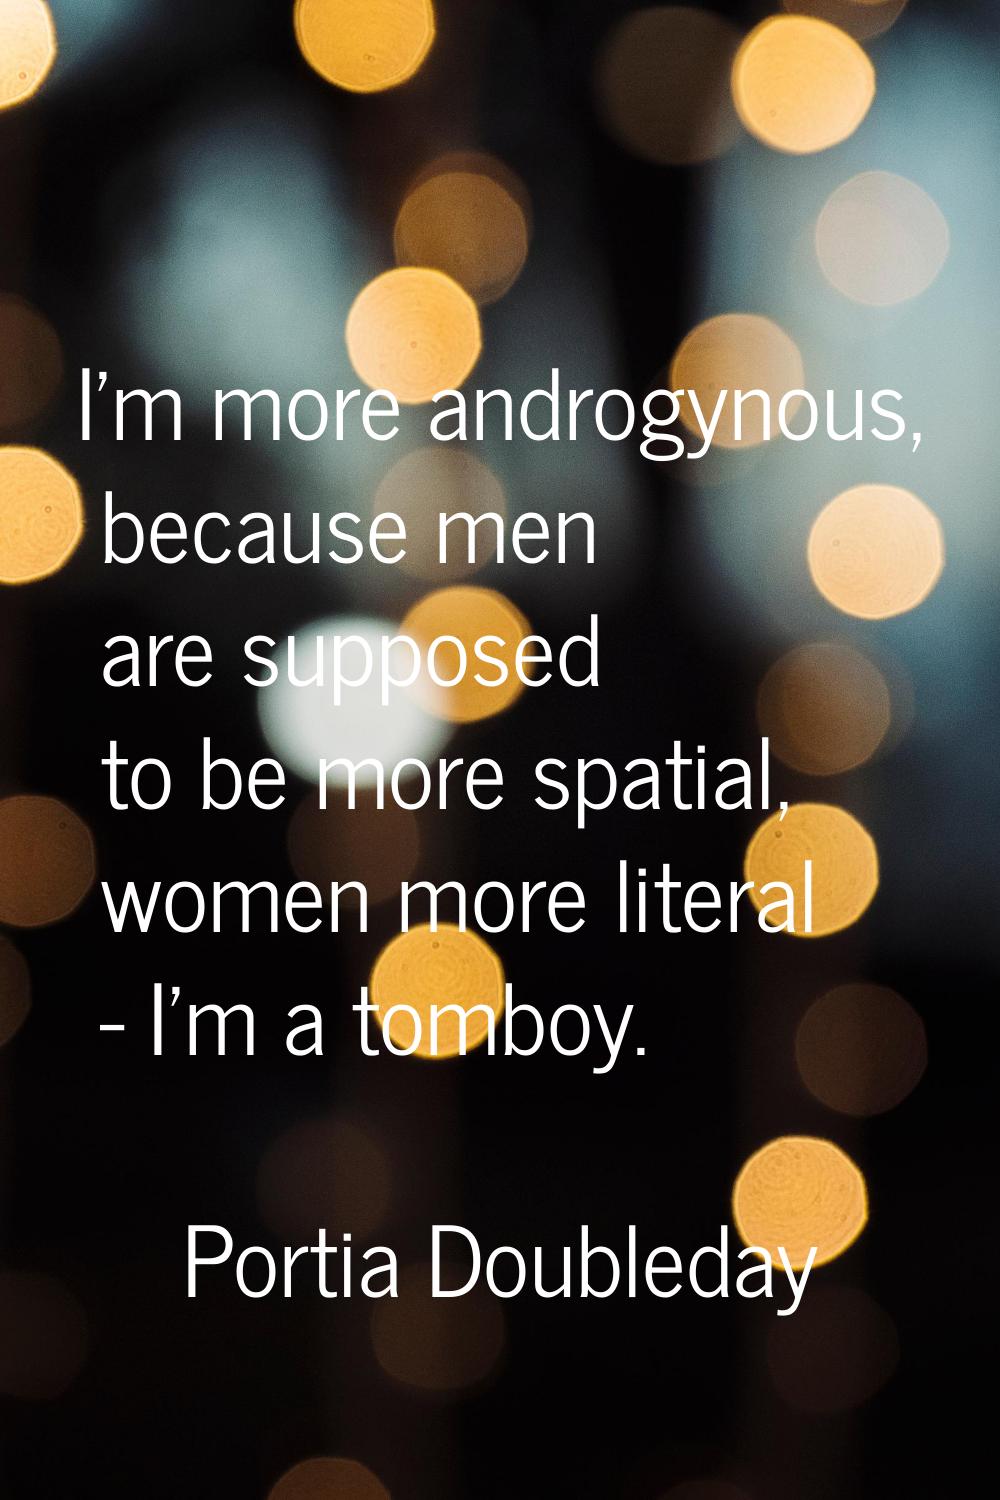 I'm more androgynous, because men are supposed to be more spatial, women more literal - I'm a tombo